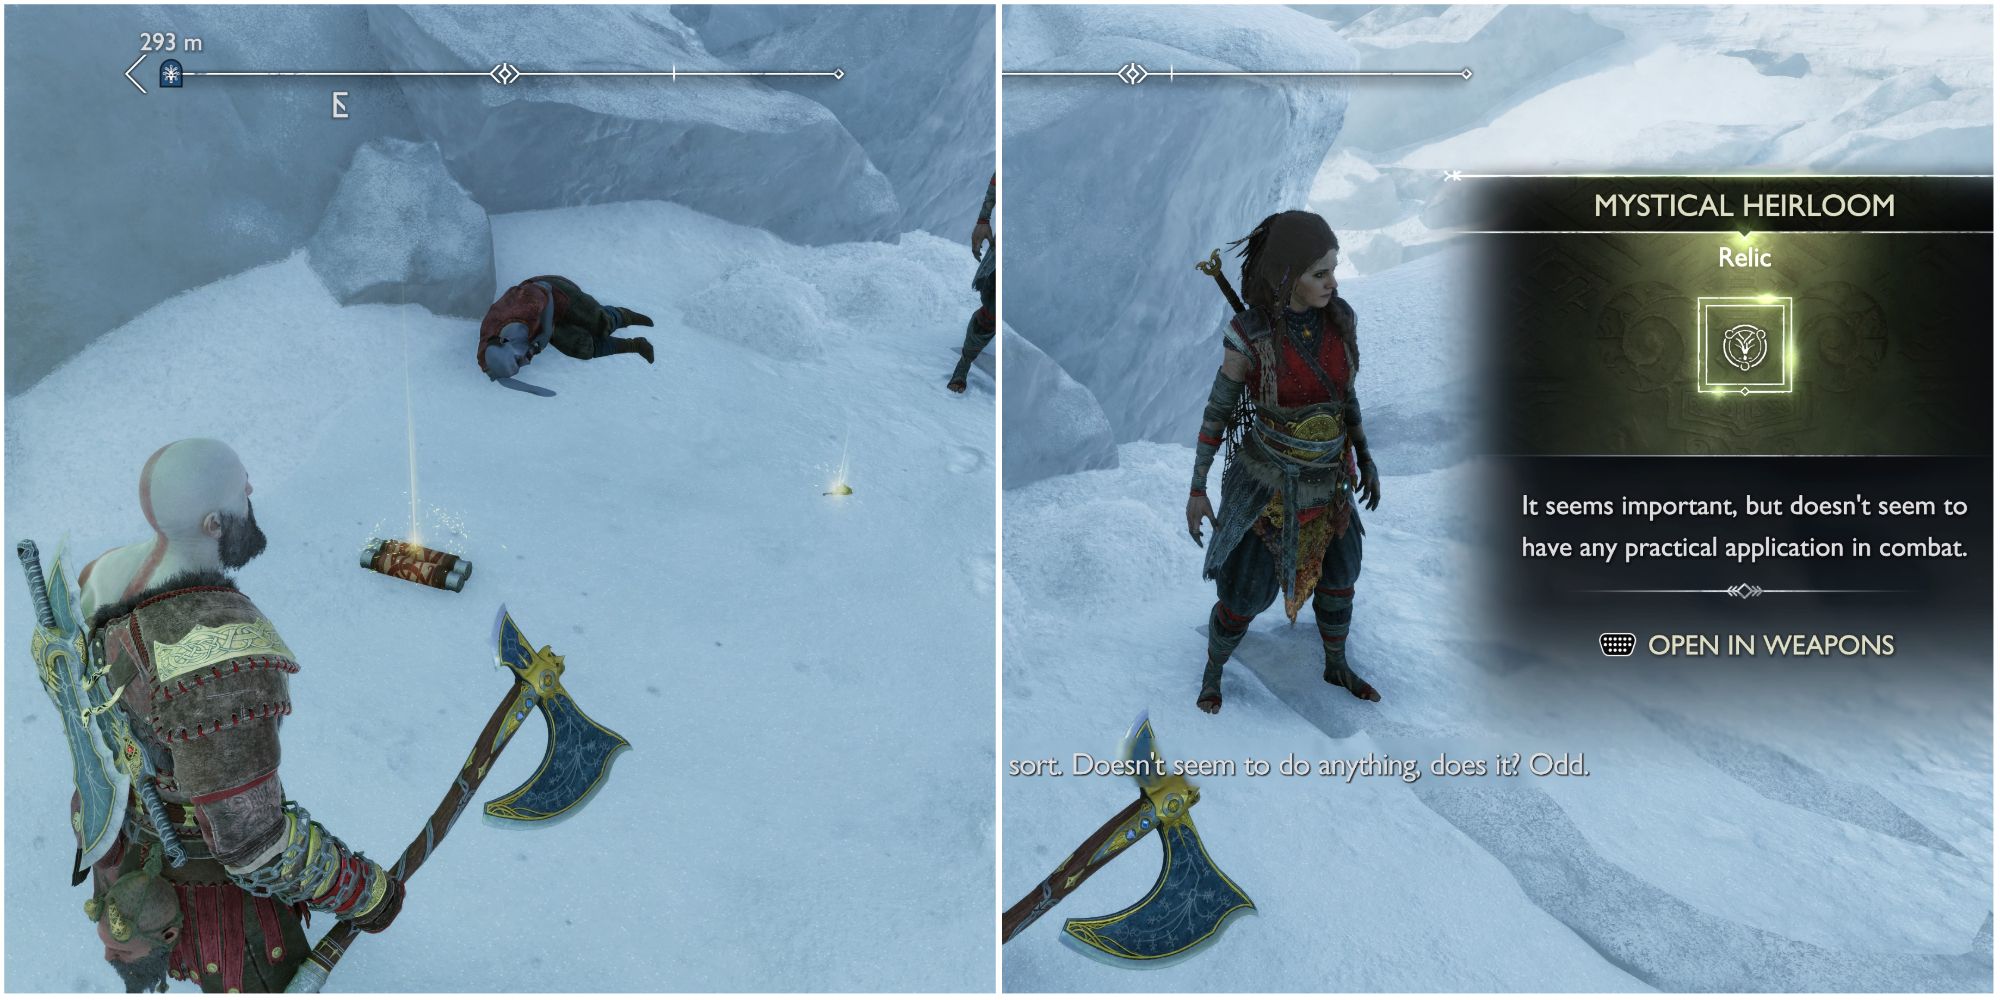 Split image showing Kratos approaching the Mystical Heirloom.